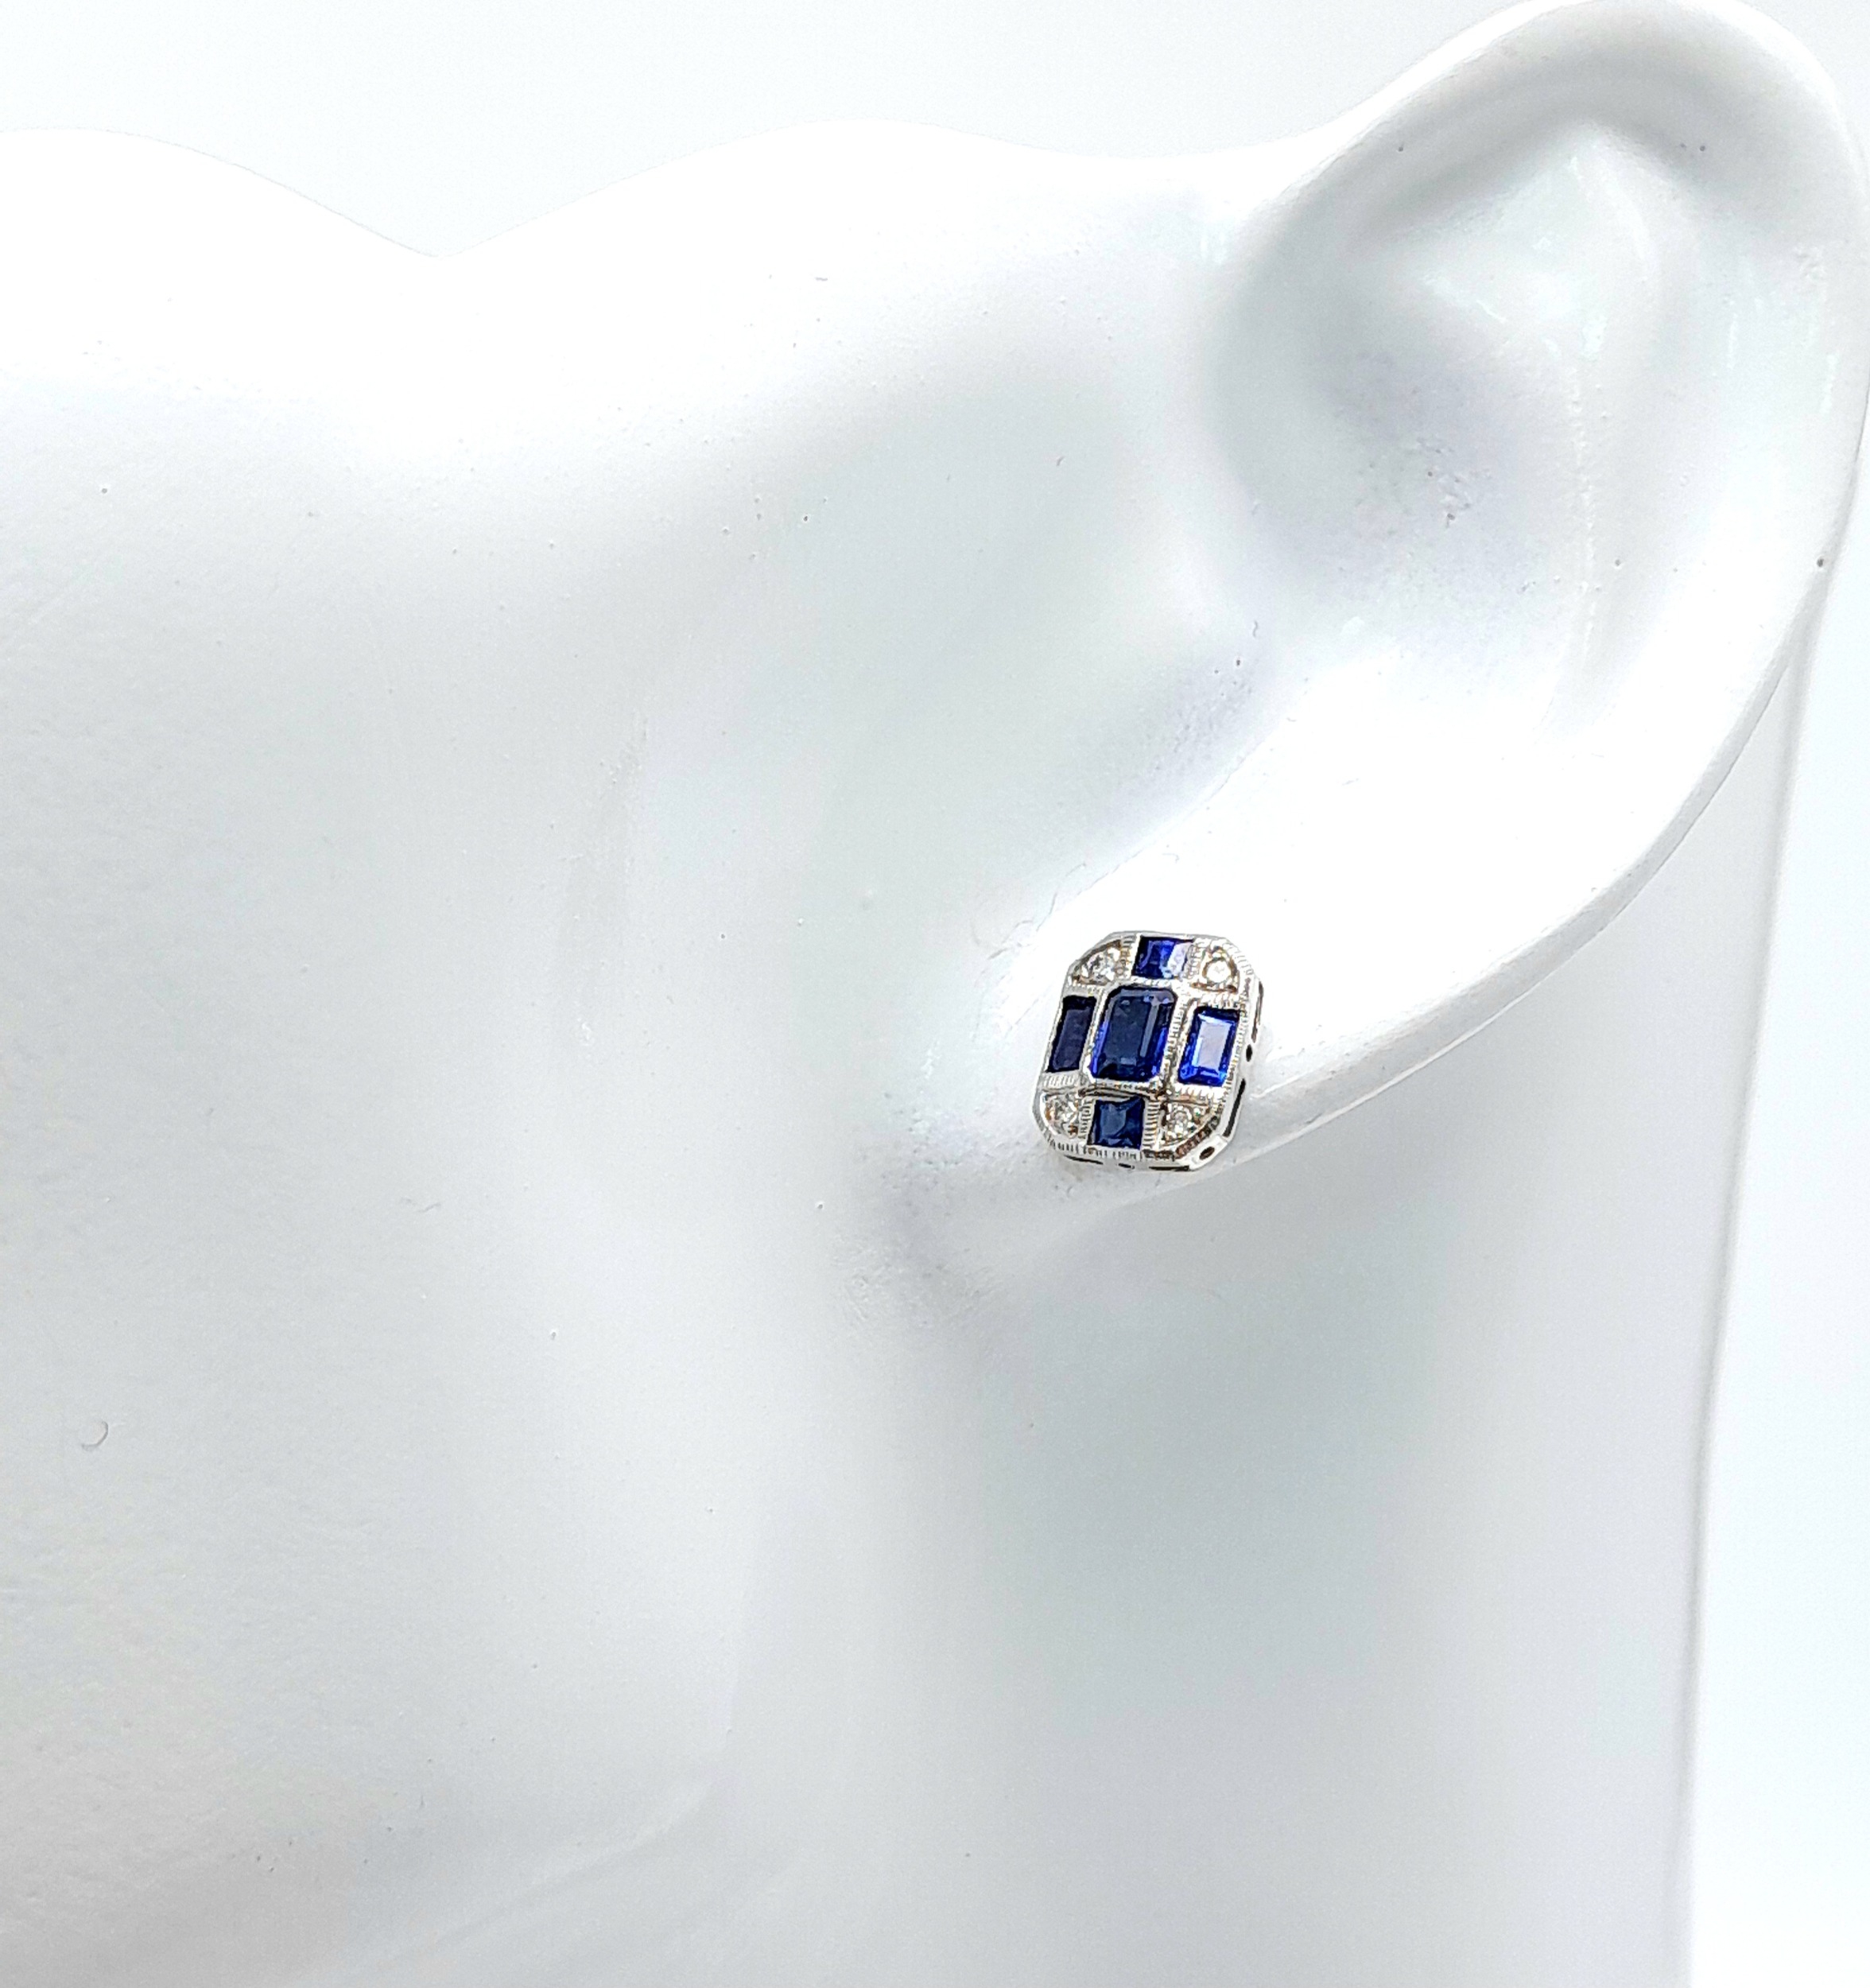 An Exquisite Pair of Vintage 9K White Gold, Diamond and Sapphire Art Deco Design Stud Earrings. - Image 2 of 6